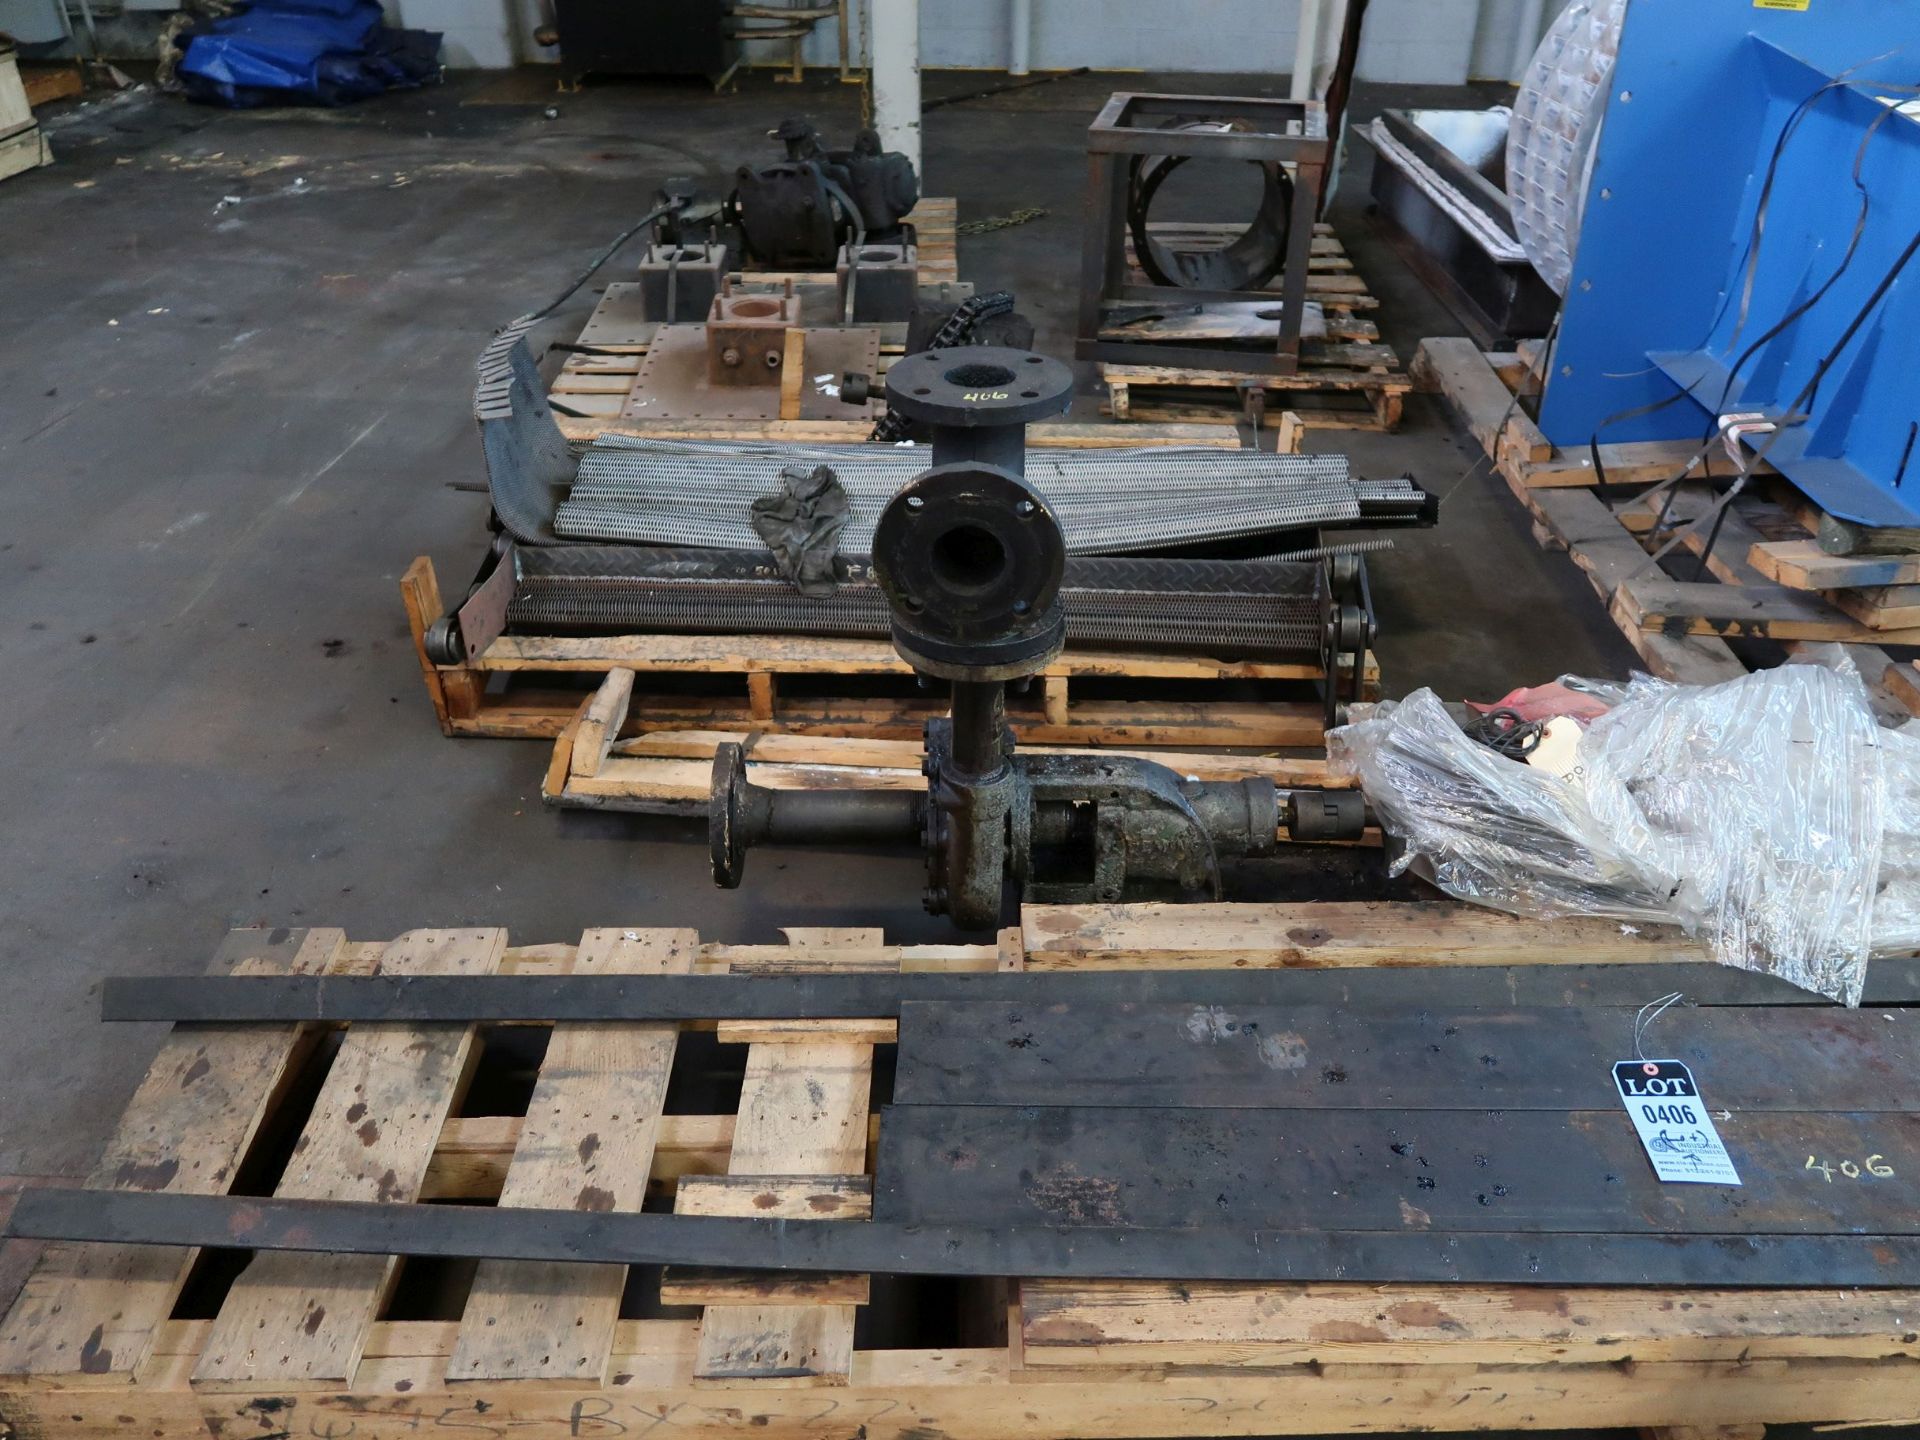 (LOT) FURNACE PARTS AND ACCESSORIES ON APPROX. (9) SKIDS **NO FAN** - FORMERLY LOT 406, USED WITH